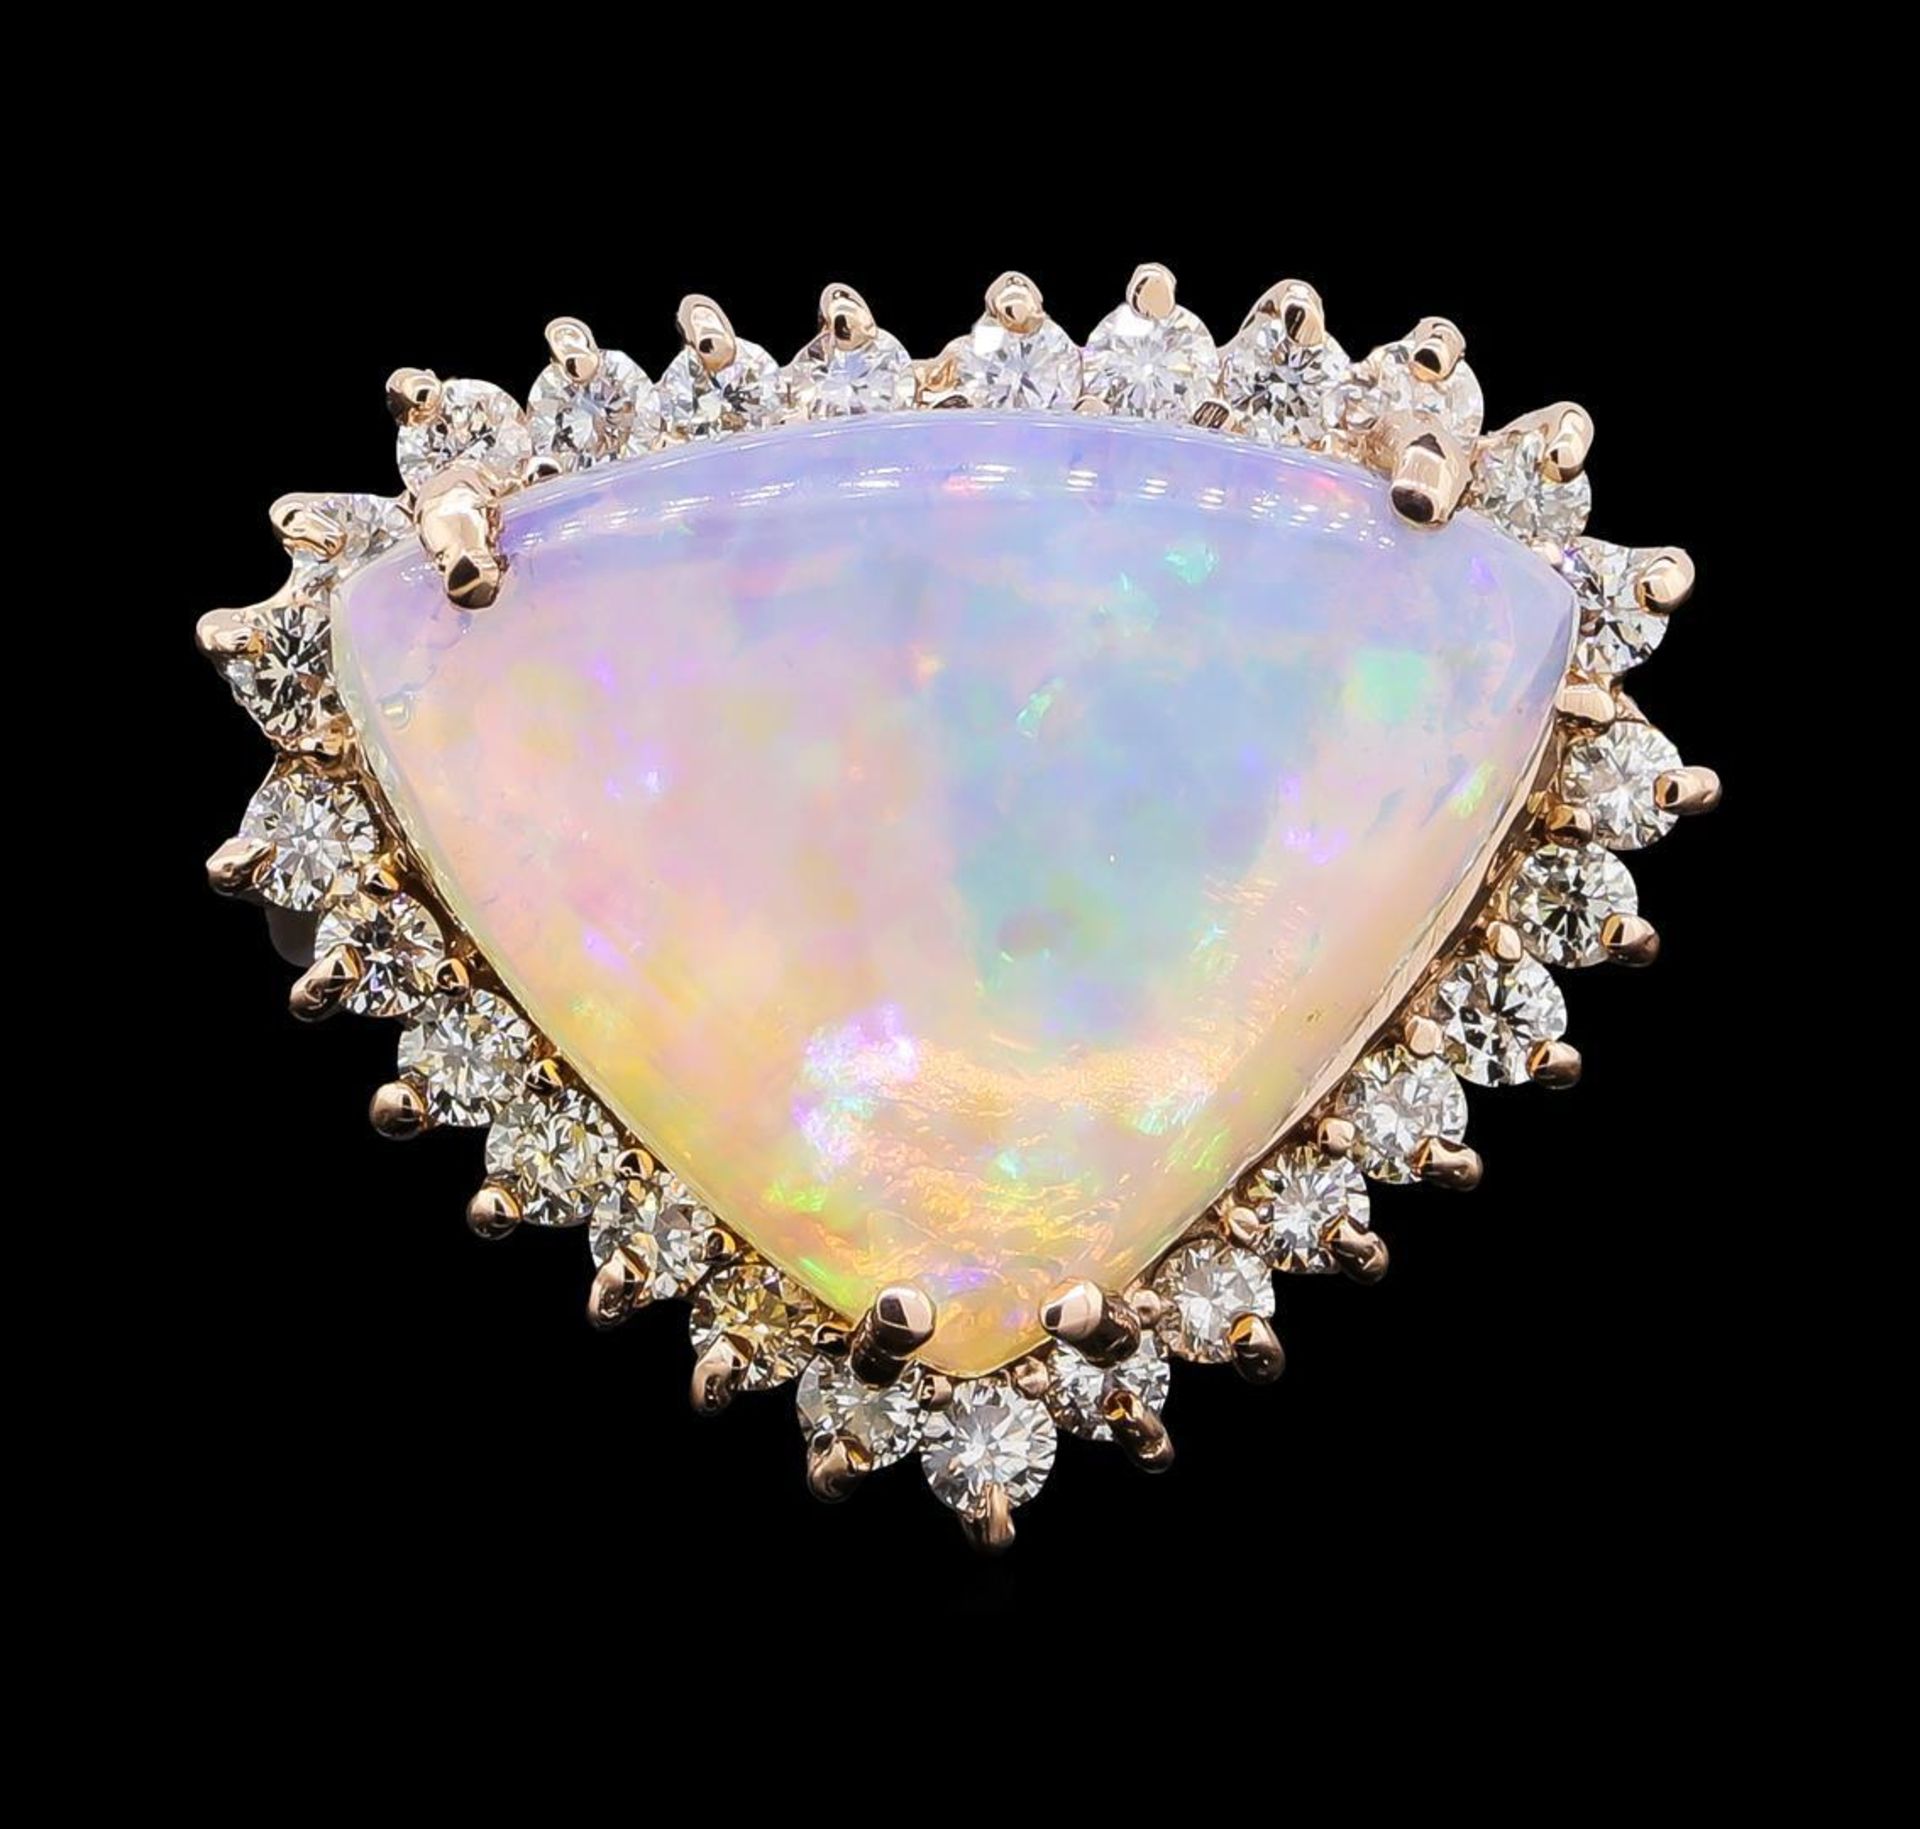 7.51 ctw Opal and Diamond Ring - 14KT Rose Gold - Image 2 of 5